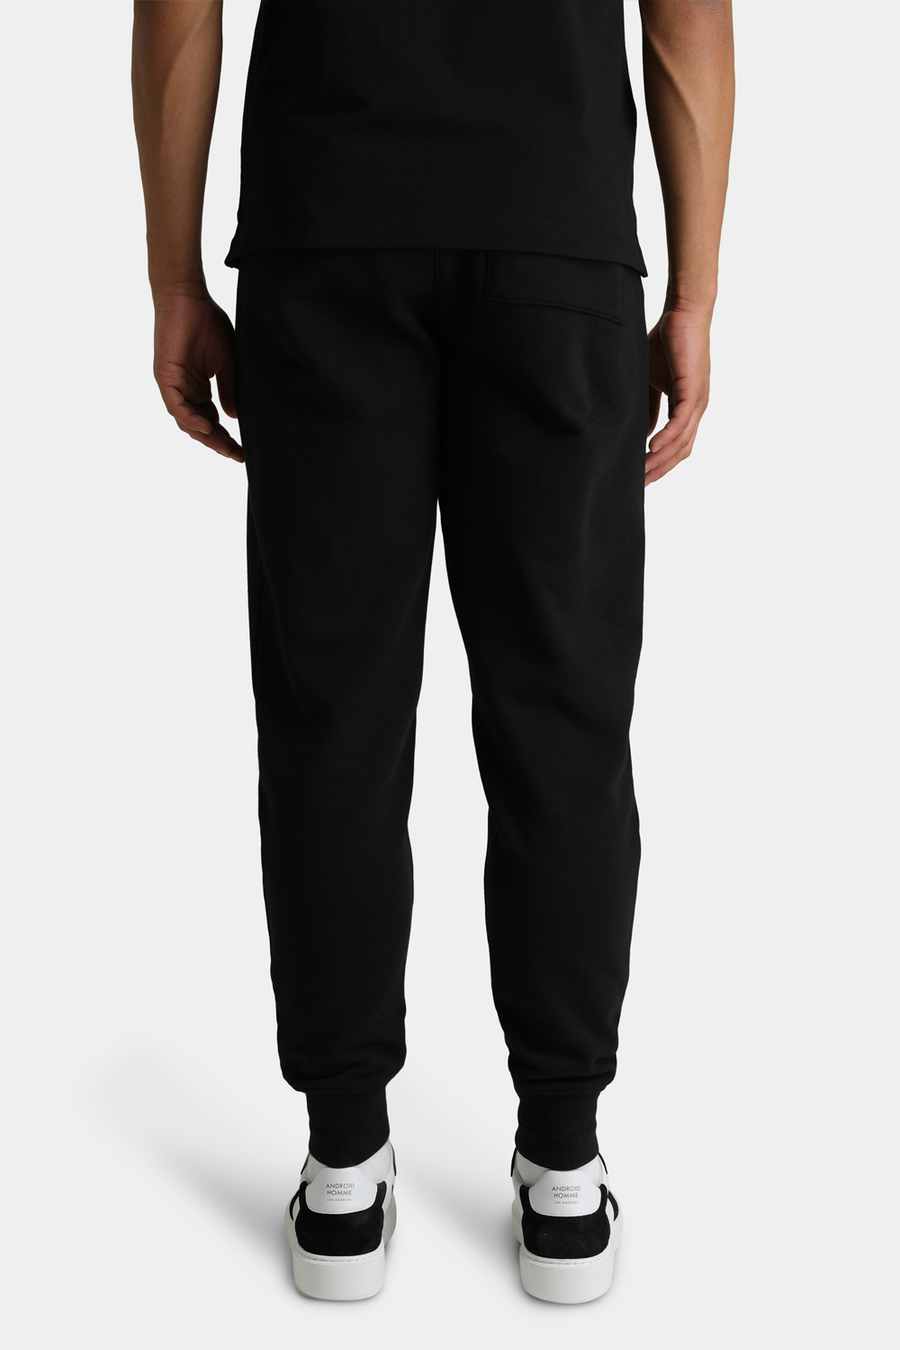 Buy the Android Homme Toggle Detail Jogger Black at Intro. Spend £50 for free UK delivery. Official stockists. We ship worldwide.